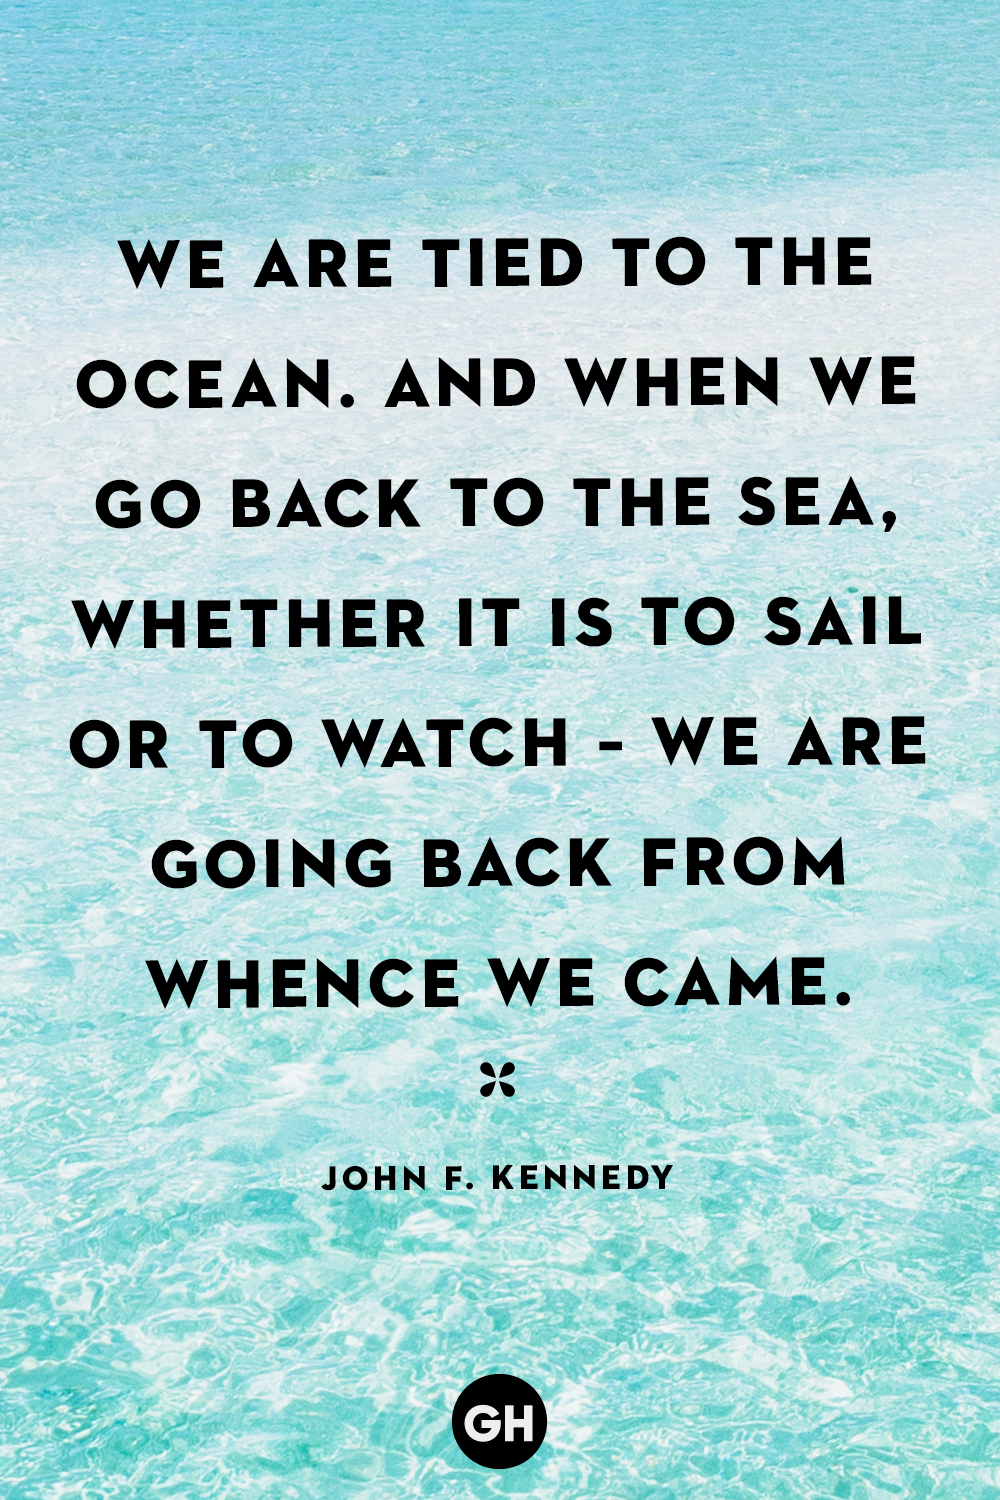 back to the beach quotes